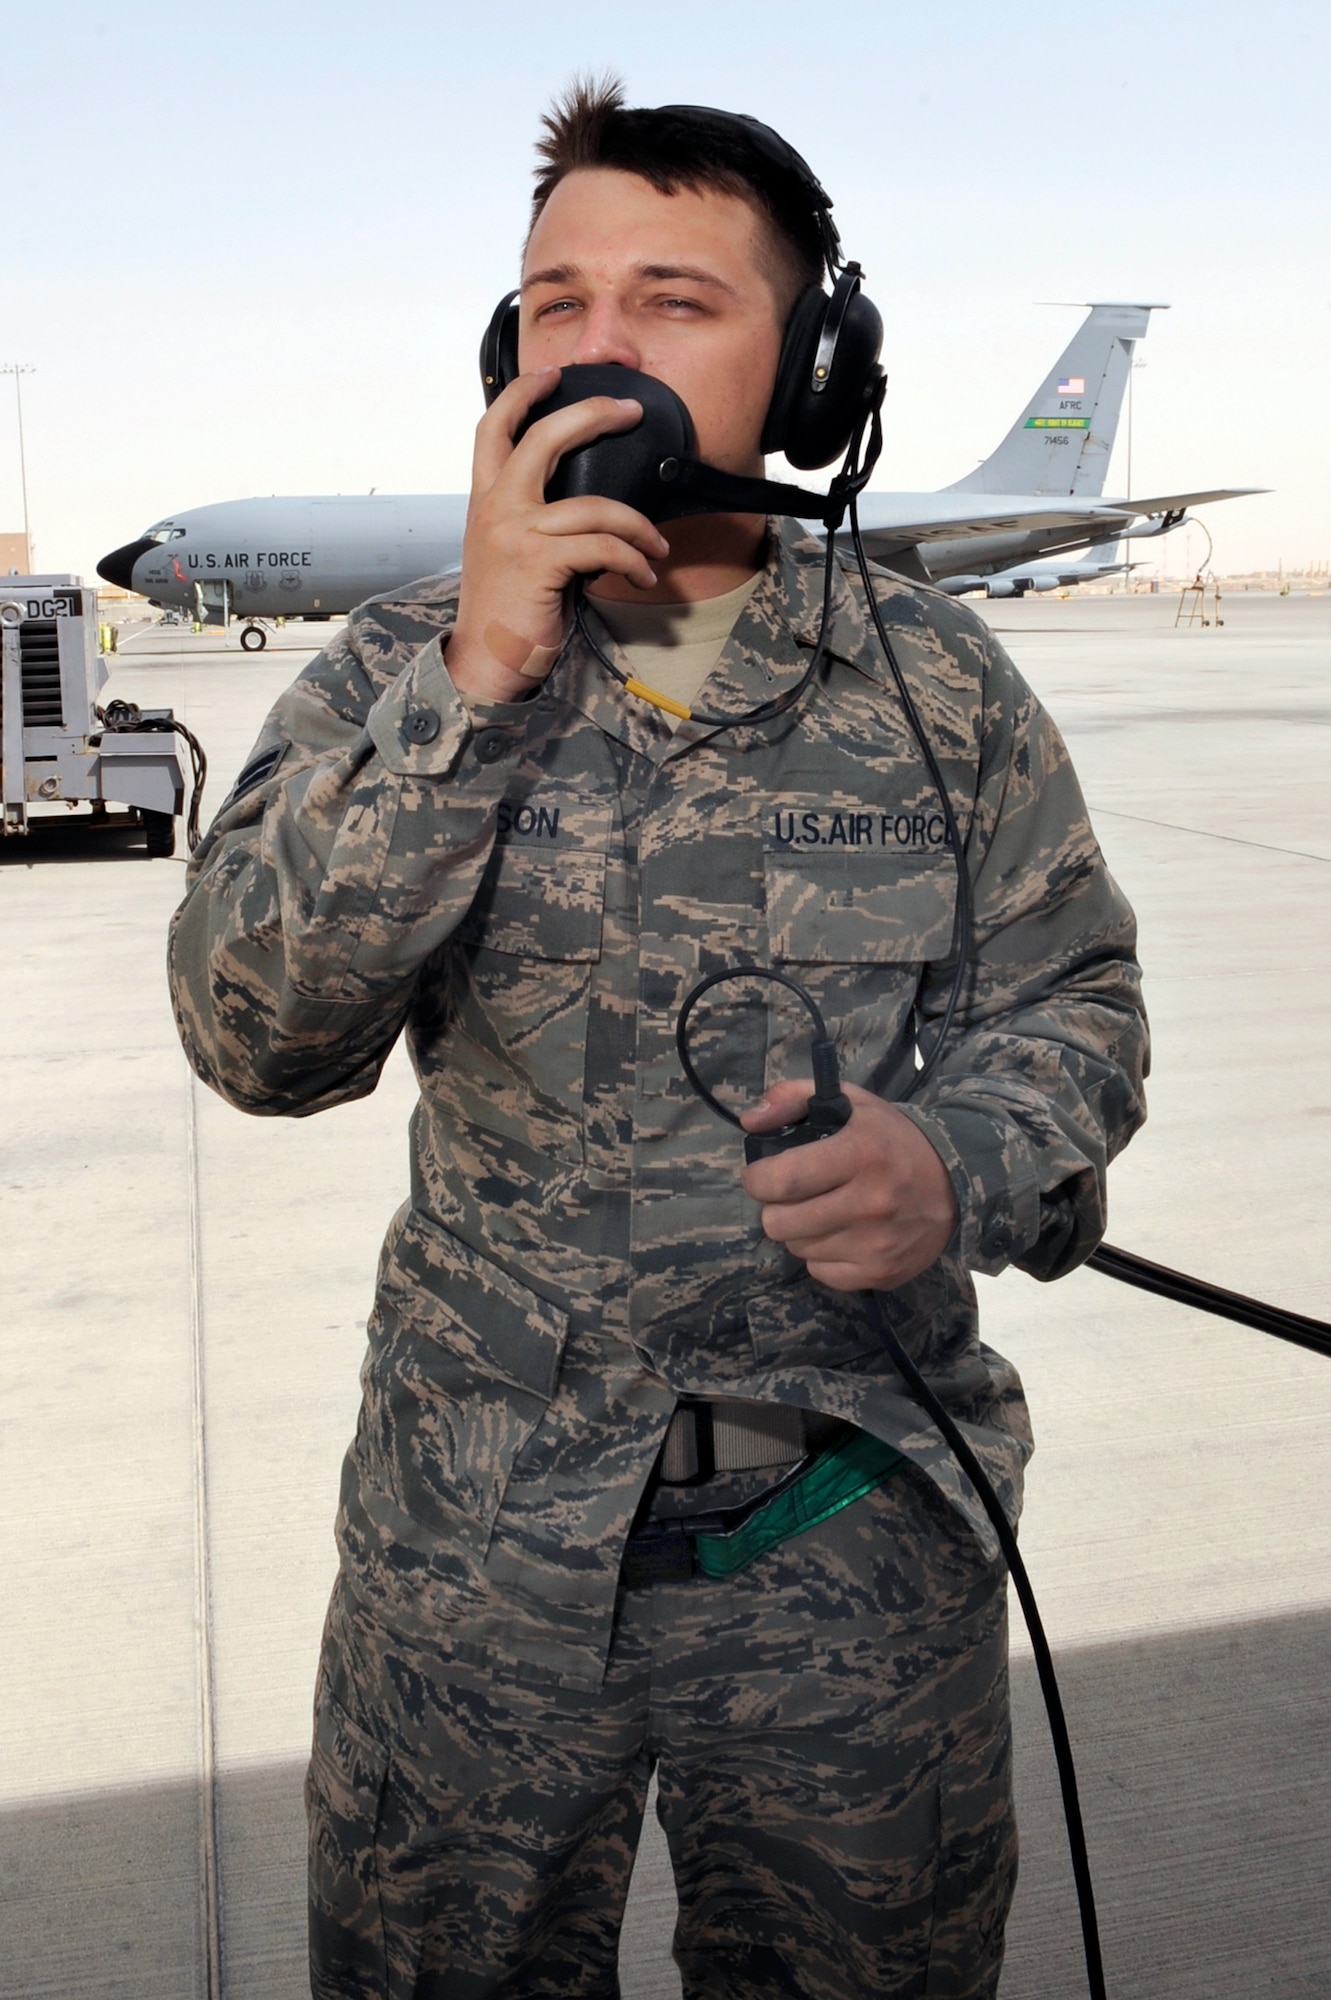 Airman 1st Class Justin Simpson, a crew chief with the 379th Expeditionary Aircraft Maintenance Squadron at an air base in Southwest Asia, talks with the pilot of a KC-135 Stratotanker via headset during the preflight check before a refueling mission. Airman Simpson serves as the "eyes on the ground" for the pilots, letting them know if everything is operating properly as they go through the checklist. (U.S. Air Force photo/Staff Sgt. Joshua Garcia)